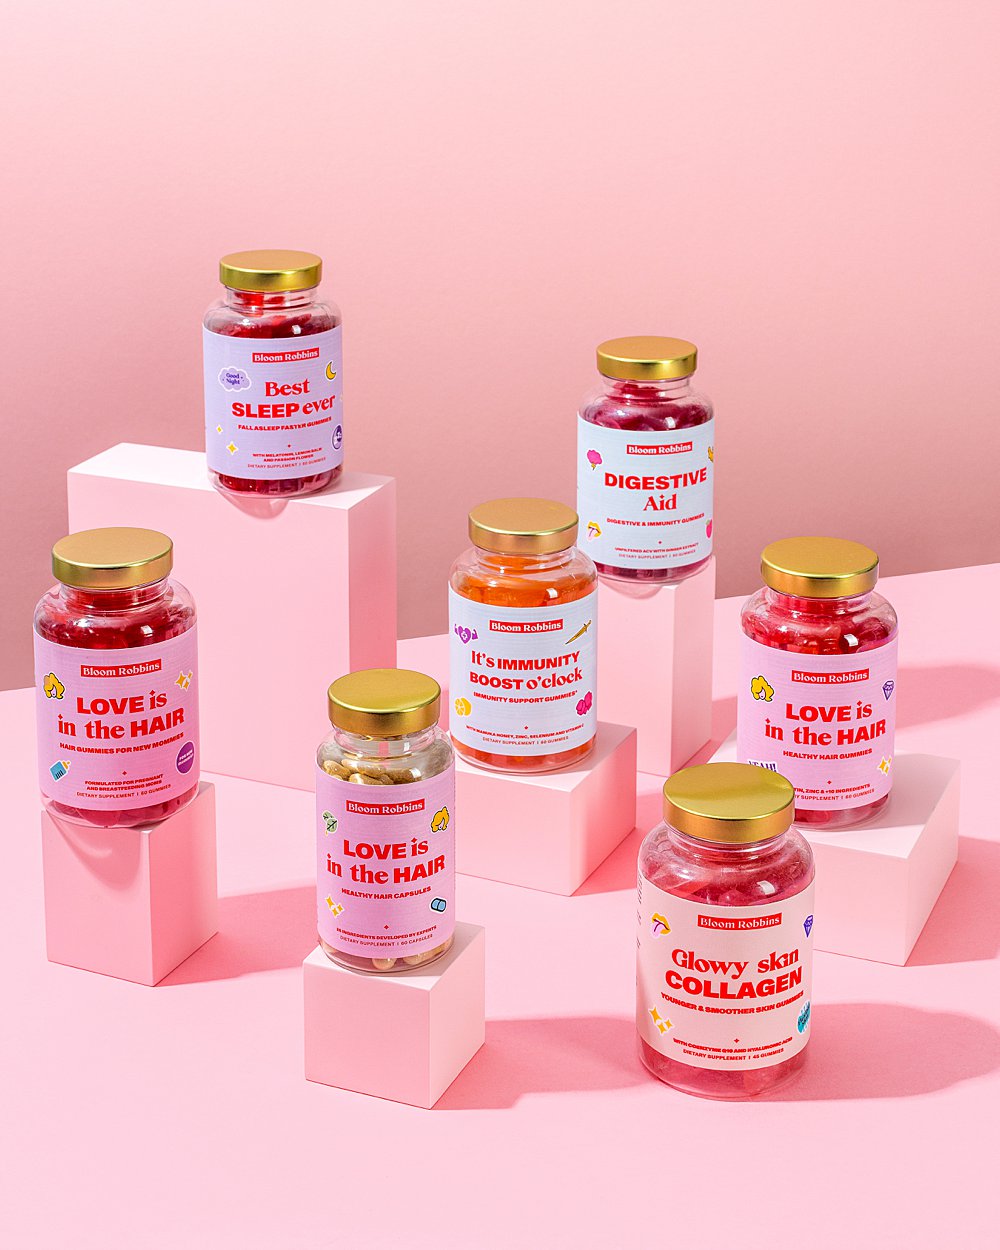 Colourful stills content creation for Bloom Robbins vitamins. Styled health product stills photography by HIYA MARIANNE.